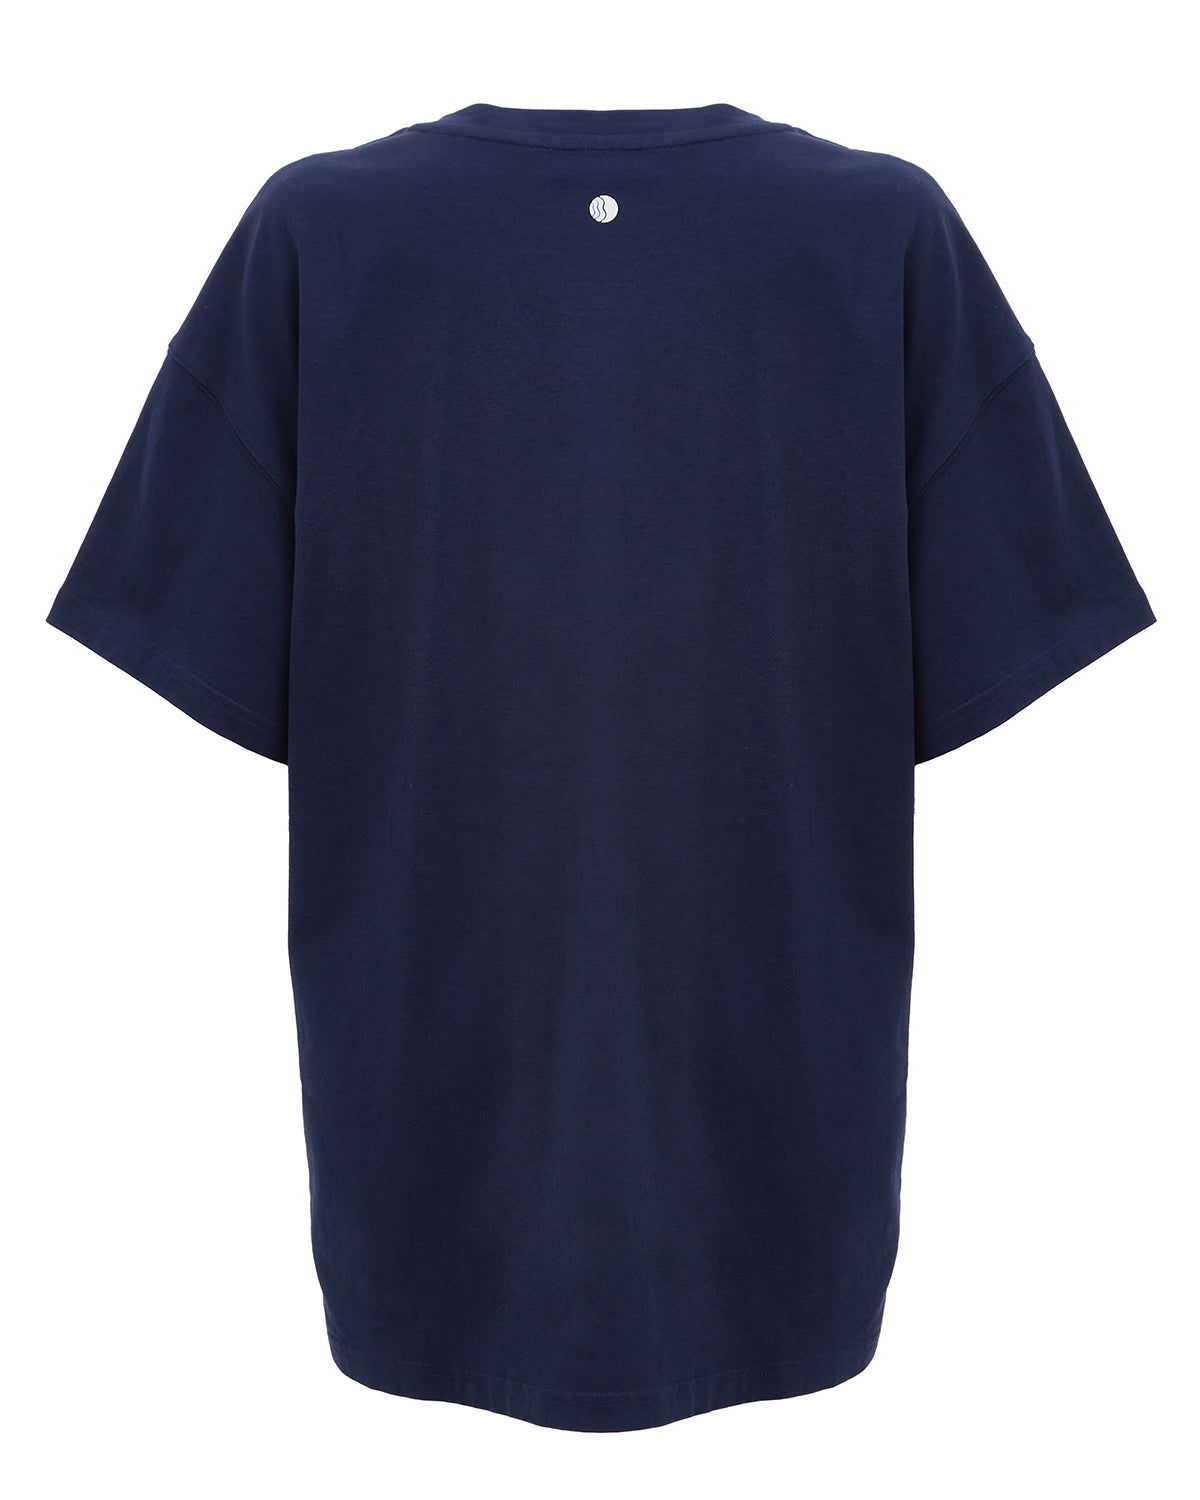 Flap T-Shirt in Navy